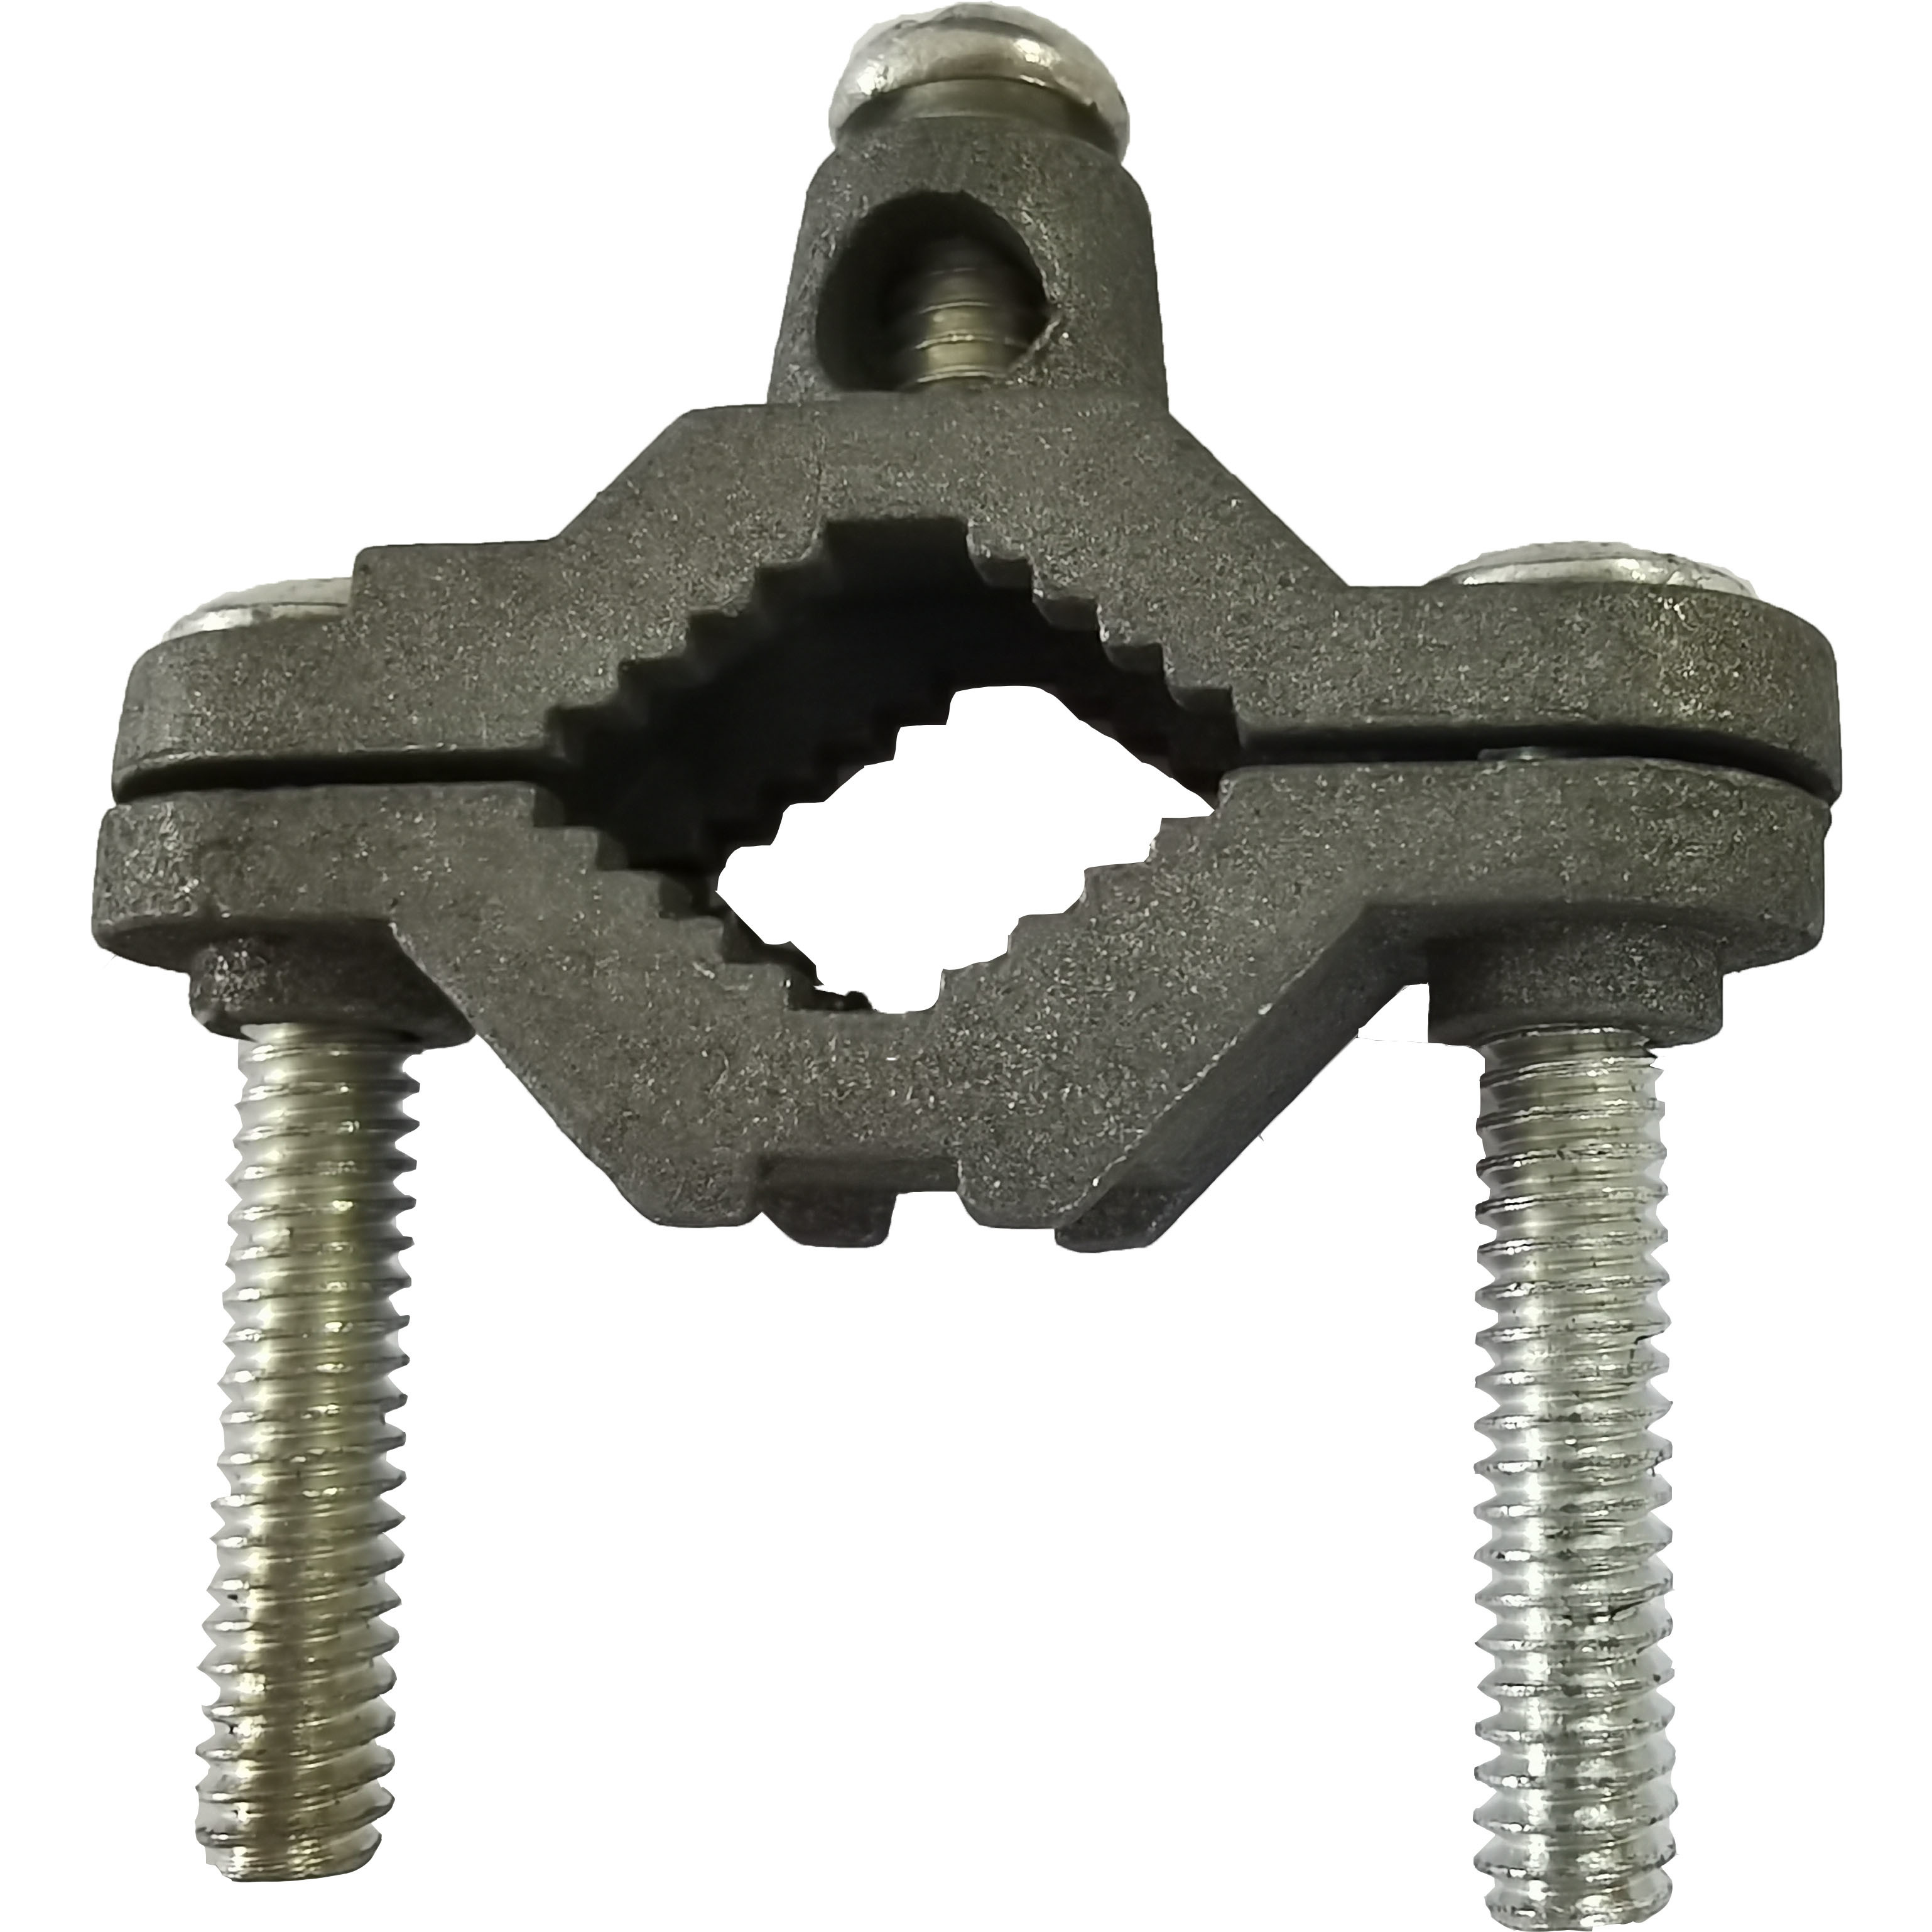 Heavy duty dia cast zinc Ground rod clamp for 1/2'' to 1'' diameter rods/ Bolt used with copper rod